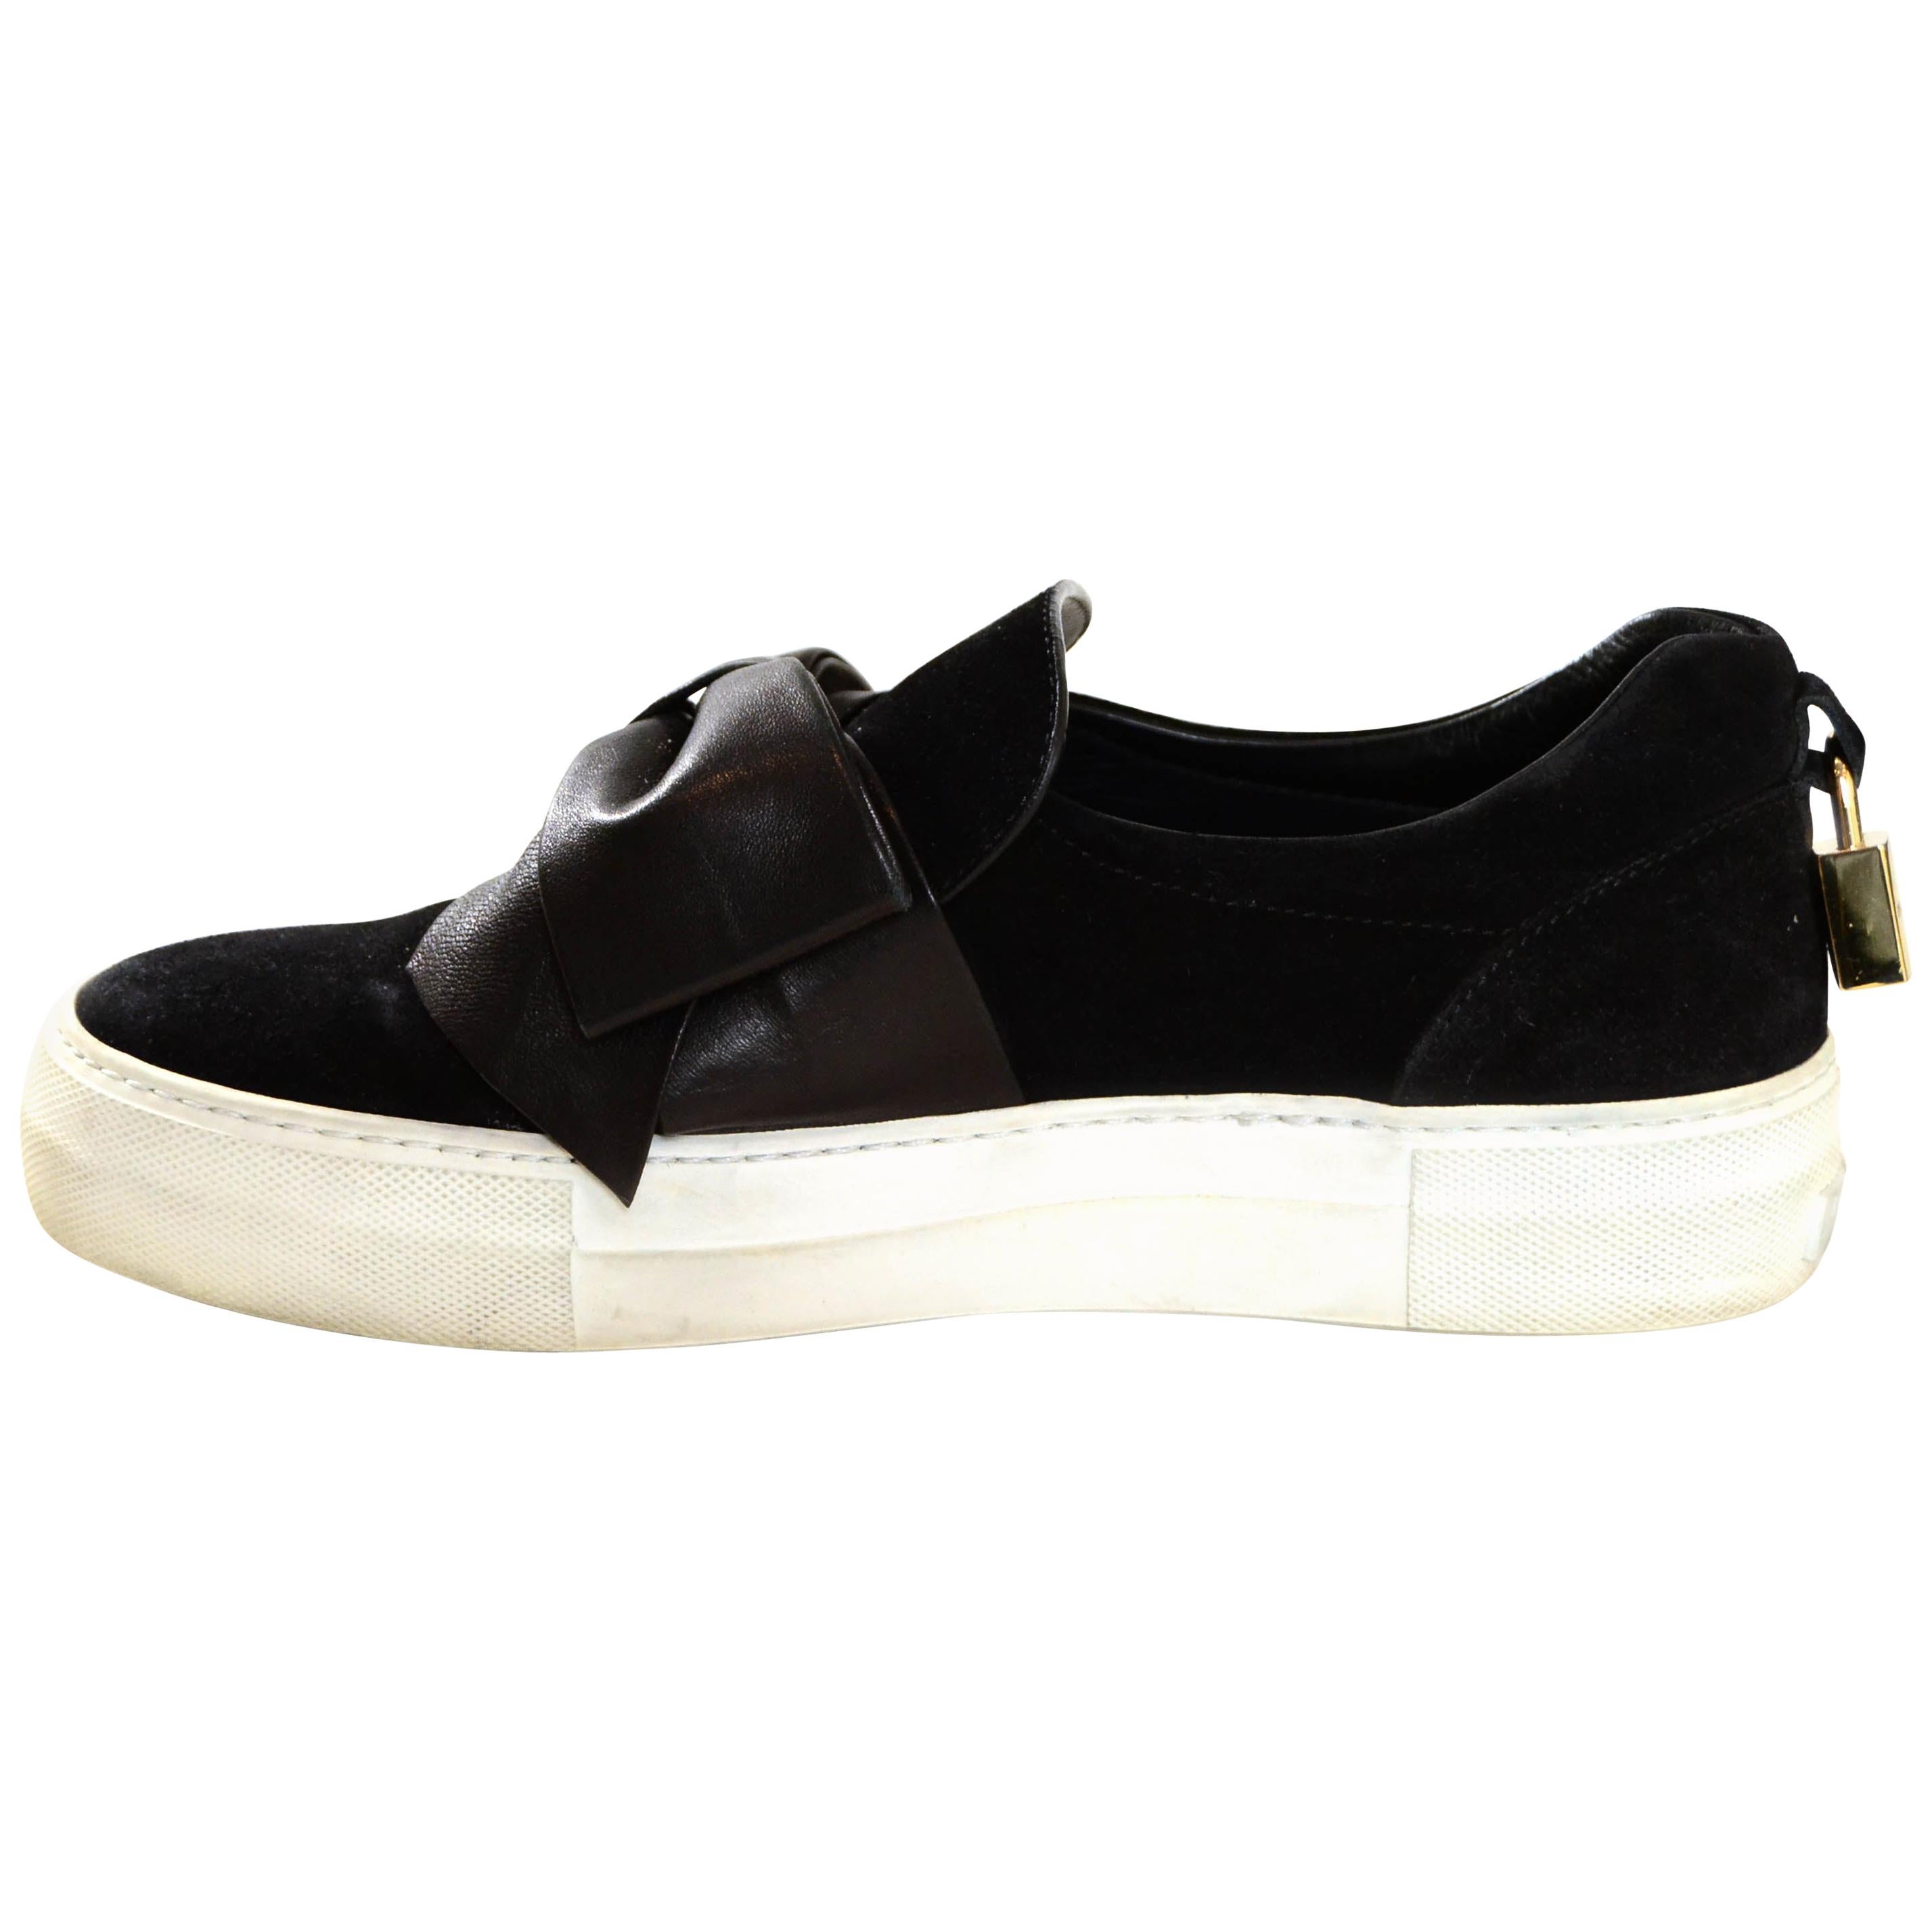 Buscemi Black Suede Sneakers w/ Bow Accents

Made In: Italy
Color:Black
Hardware: Goldtone
Materials: Suede, Leather
Closure/Opening: Slip on
Overall Condition: Very good - some scuffs to rubber platform
Includes: Goldtone lock at back

Marked Size: